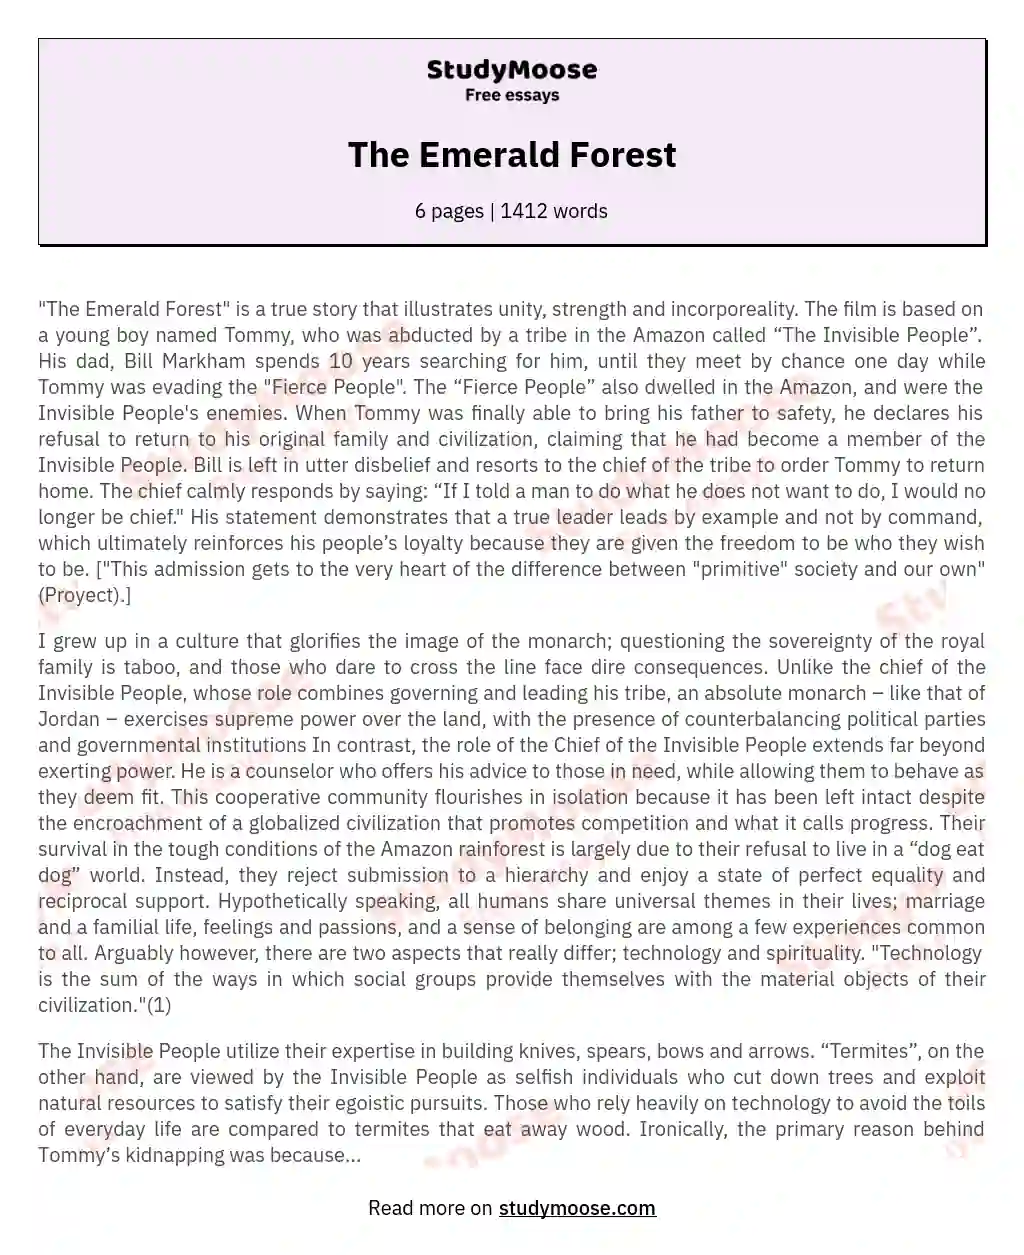 The Emerald Forest essay